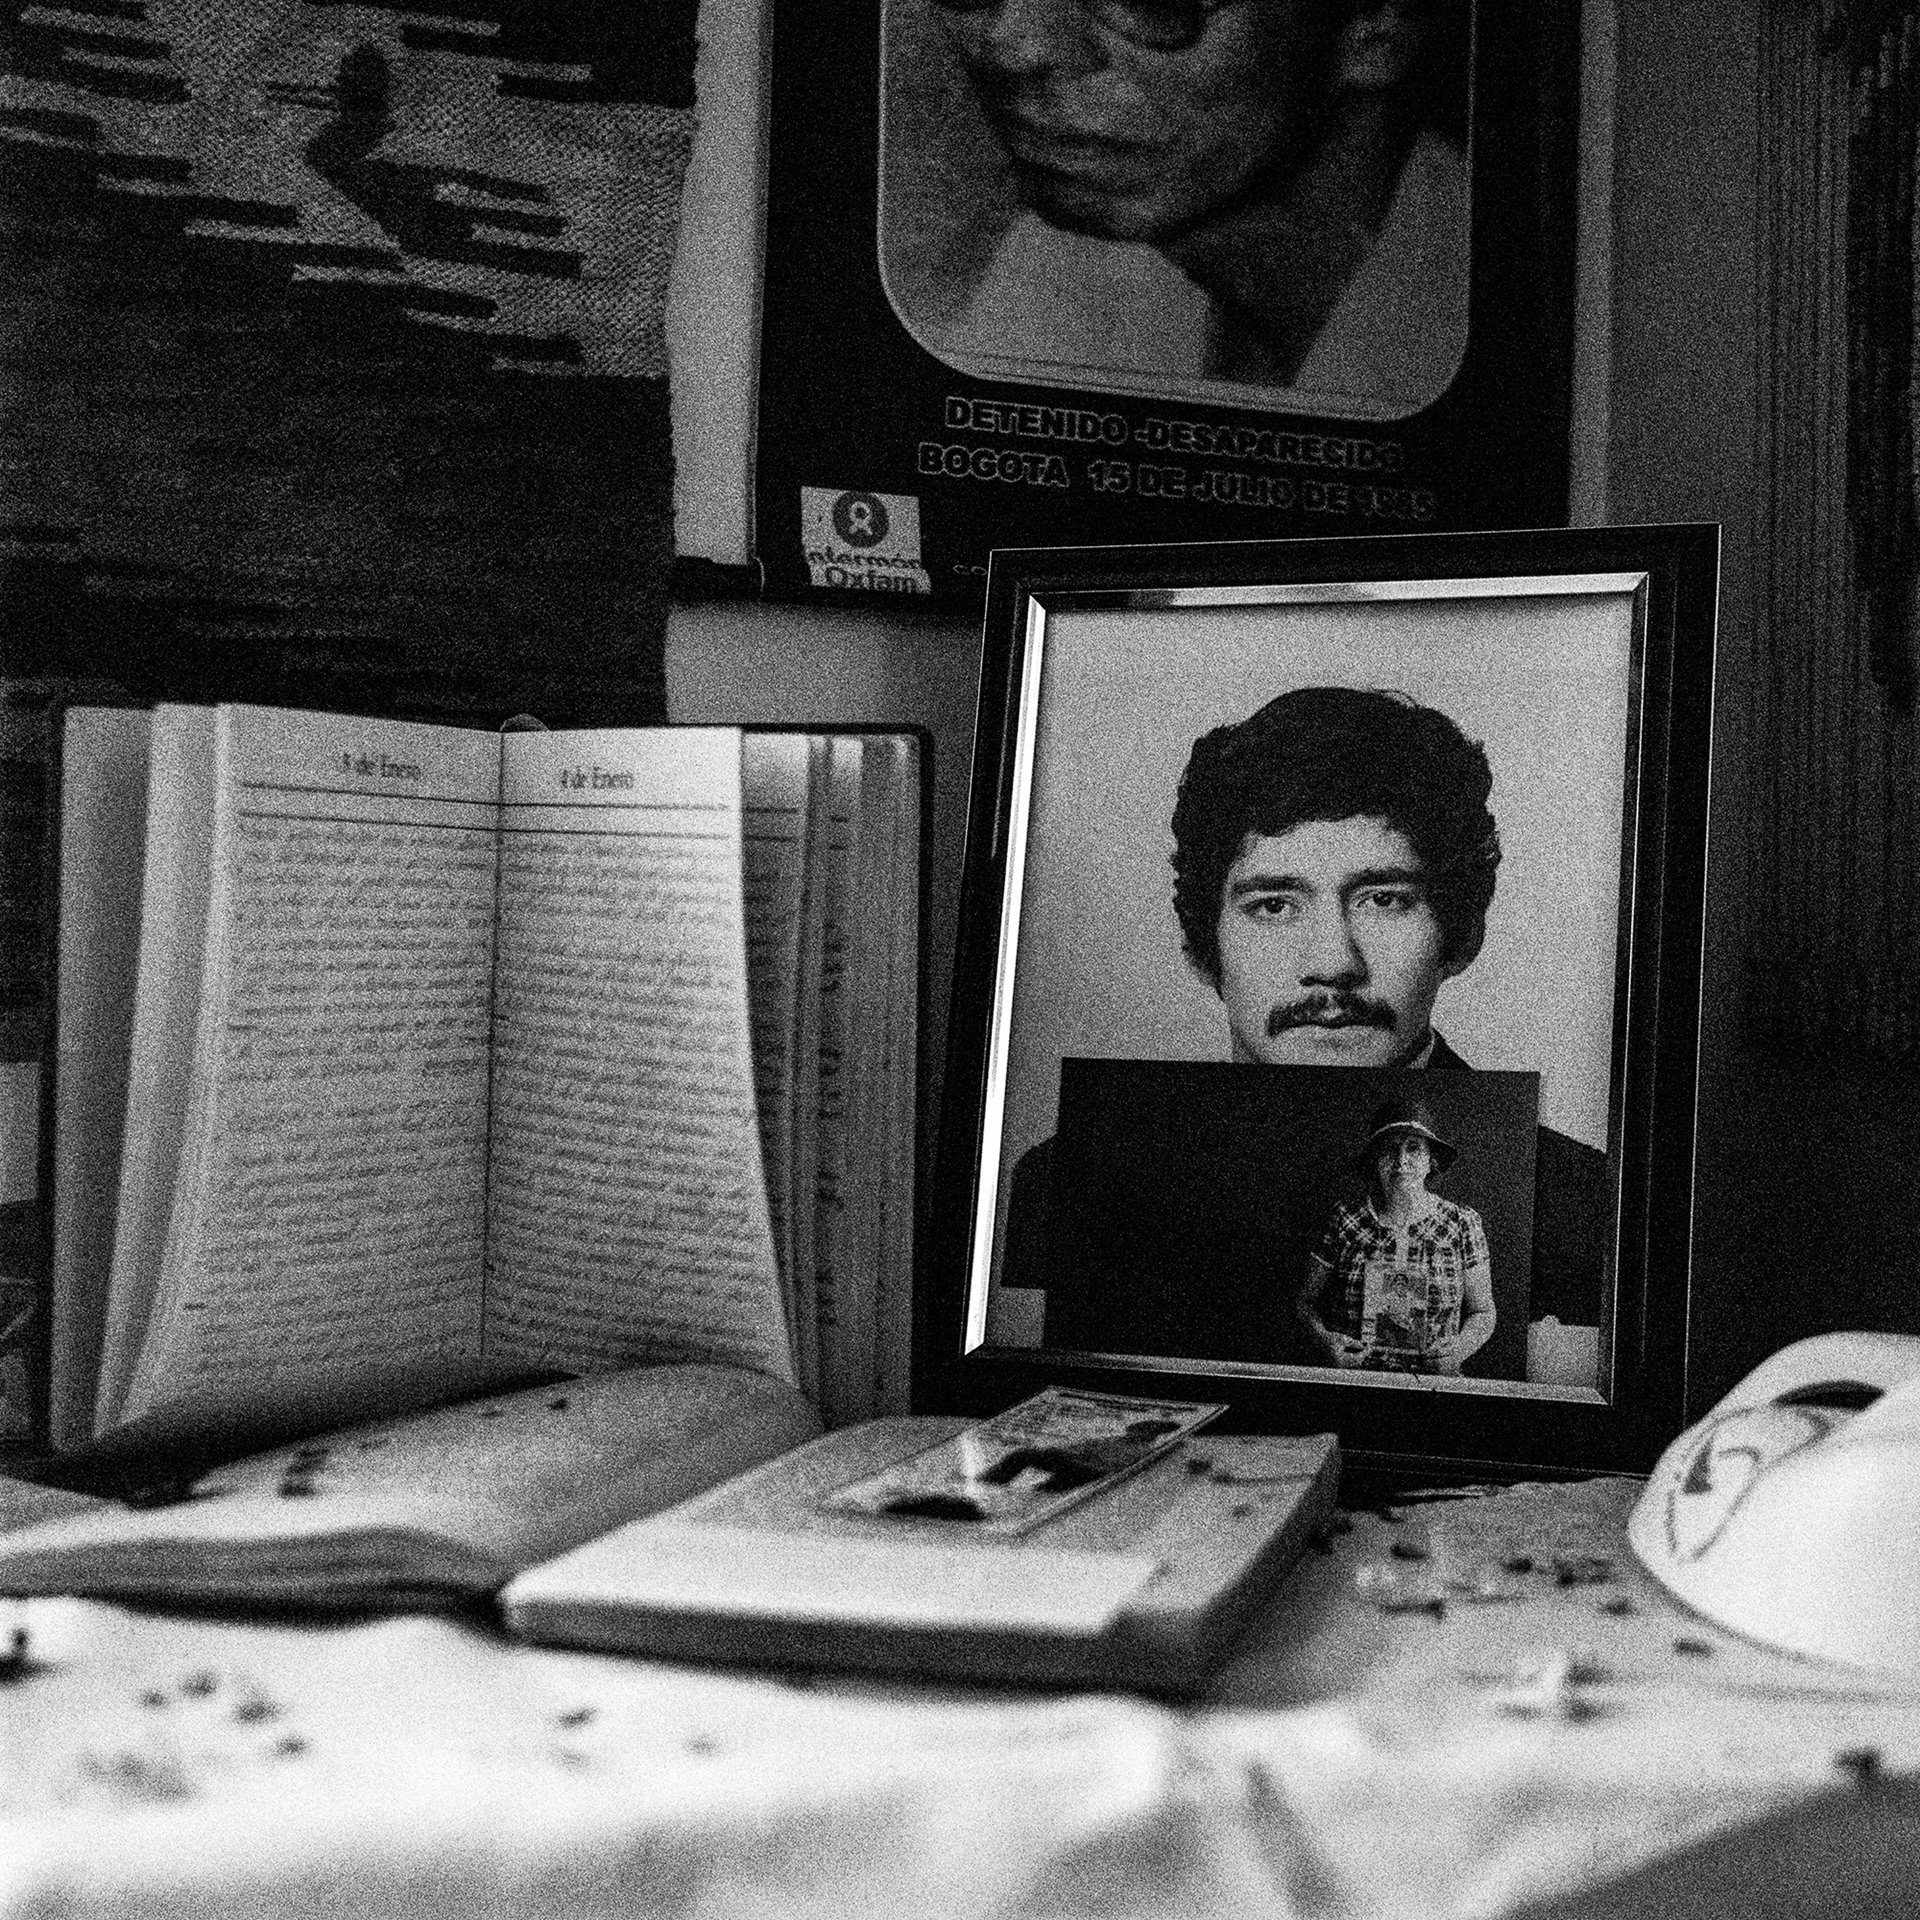 An altar to the memory of Eduardo Loffsner Torres stands in the home of his former partner Luz Marina Hache Contreras, who has spent decades looking for him. Loffsner, who organized the Workers&#39; Union of the National Pedagogical University and was a member of the M-19, a leftist urban guerilla movement, disappeared in November 1986, when he was 31.